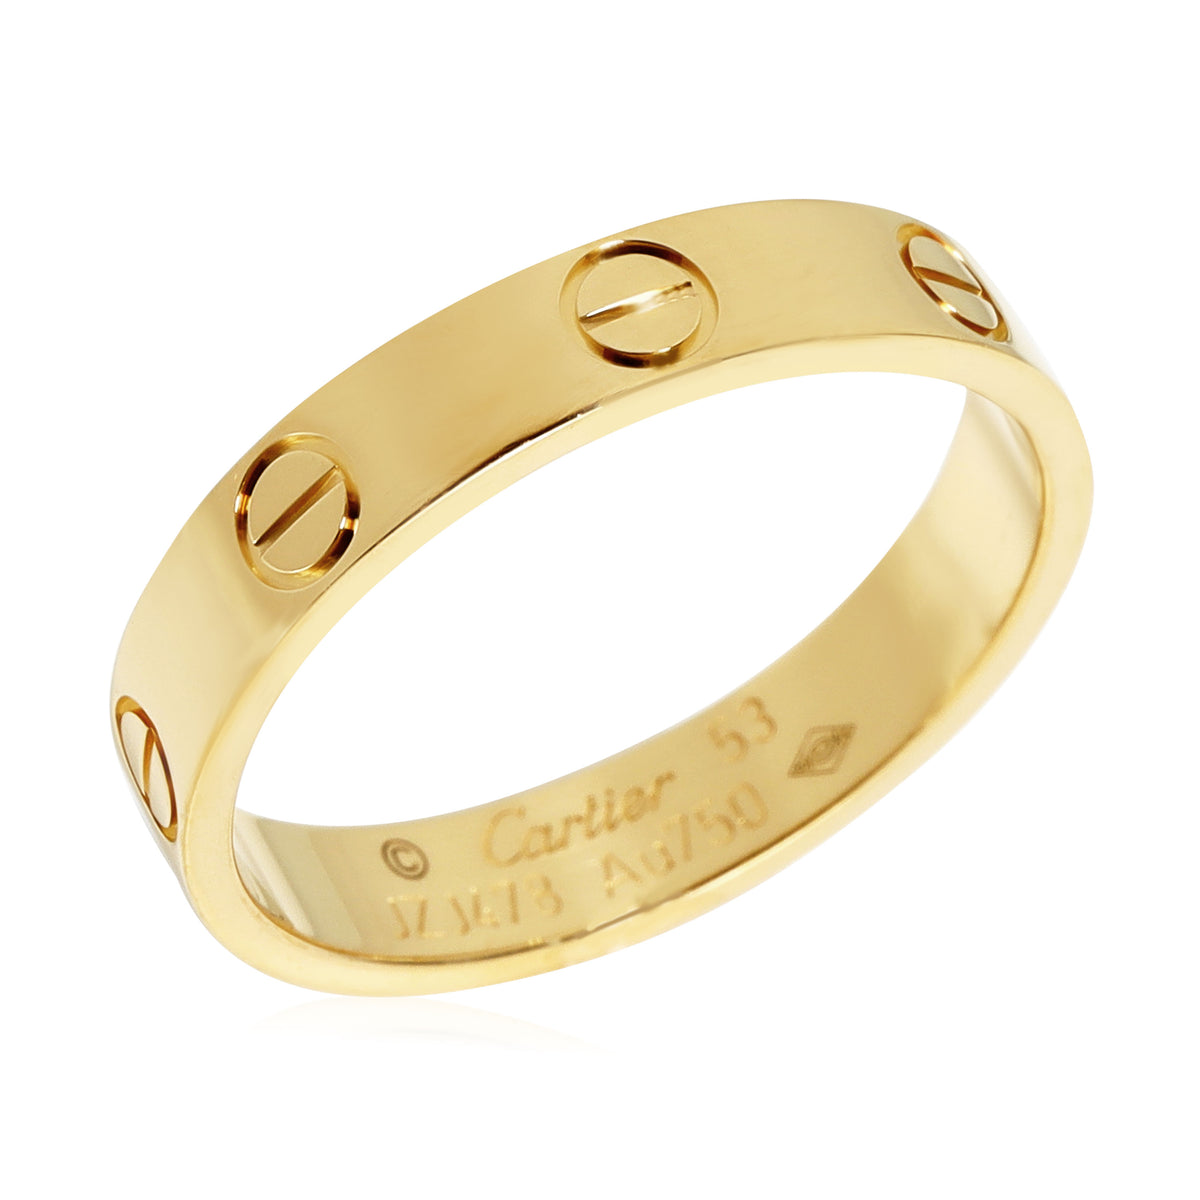 Cartier LOVE Wedding Band in 18K Yellow Gold